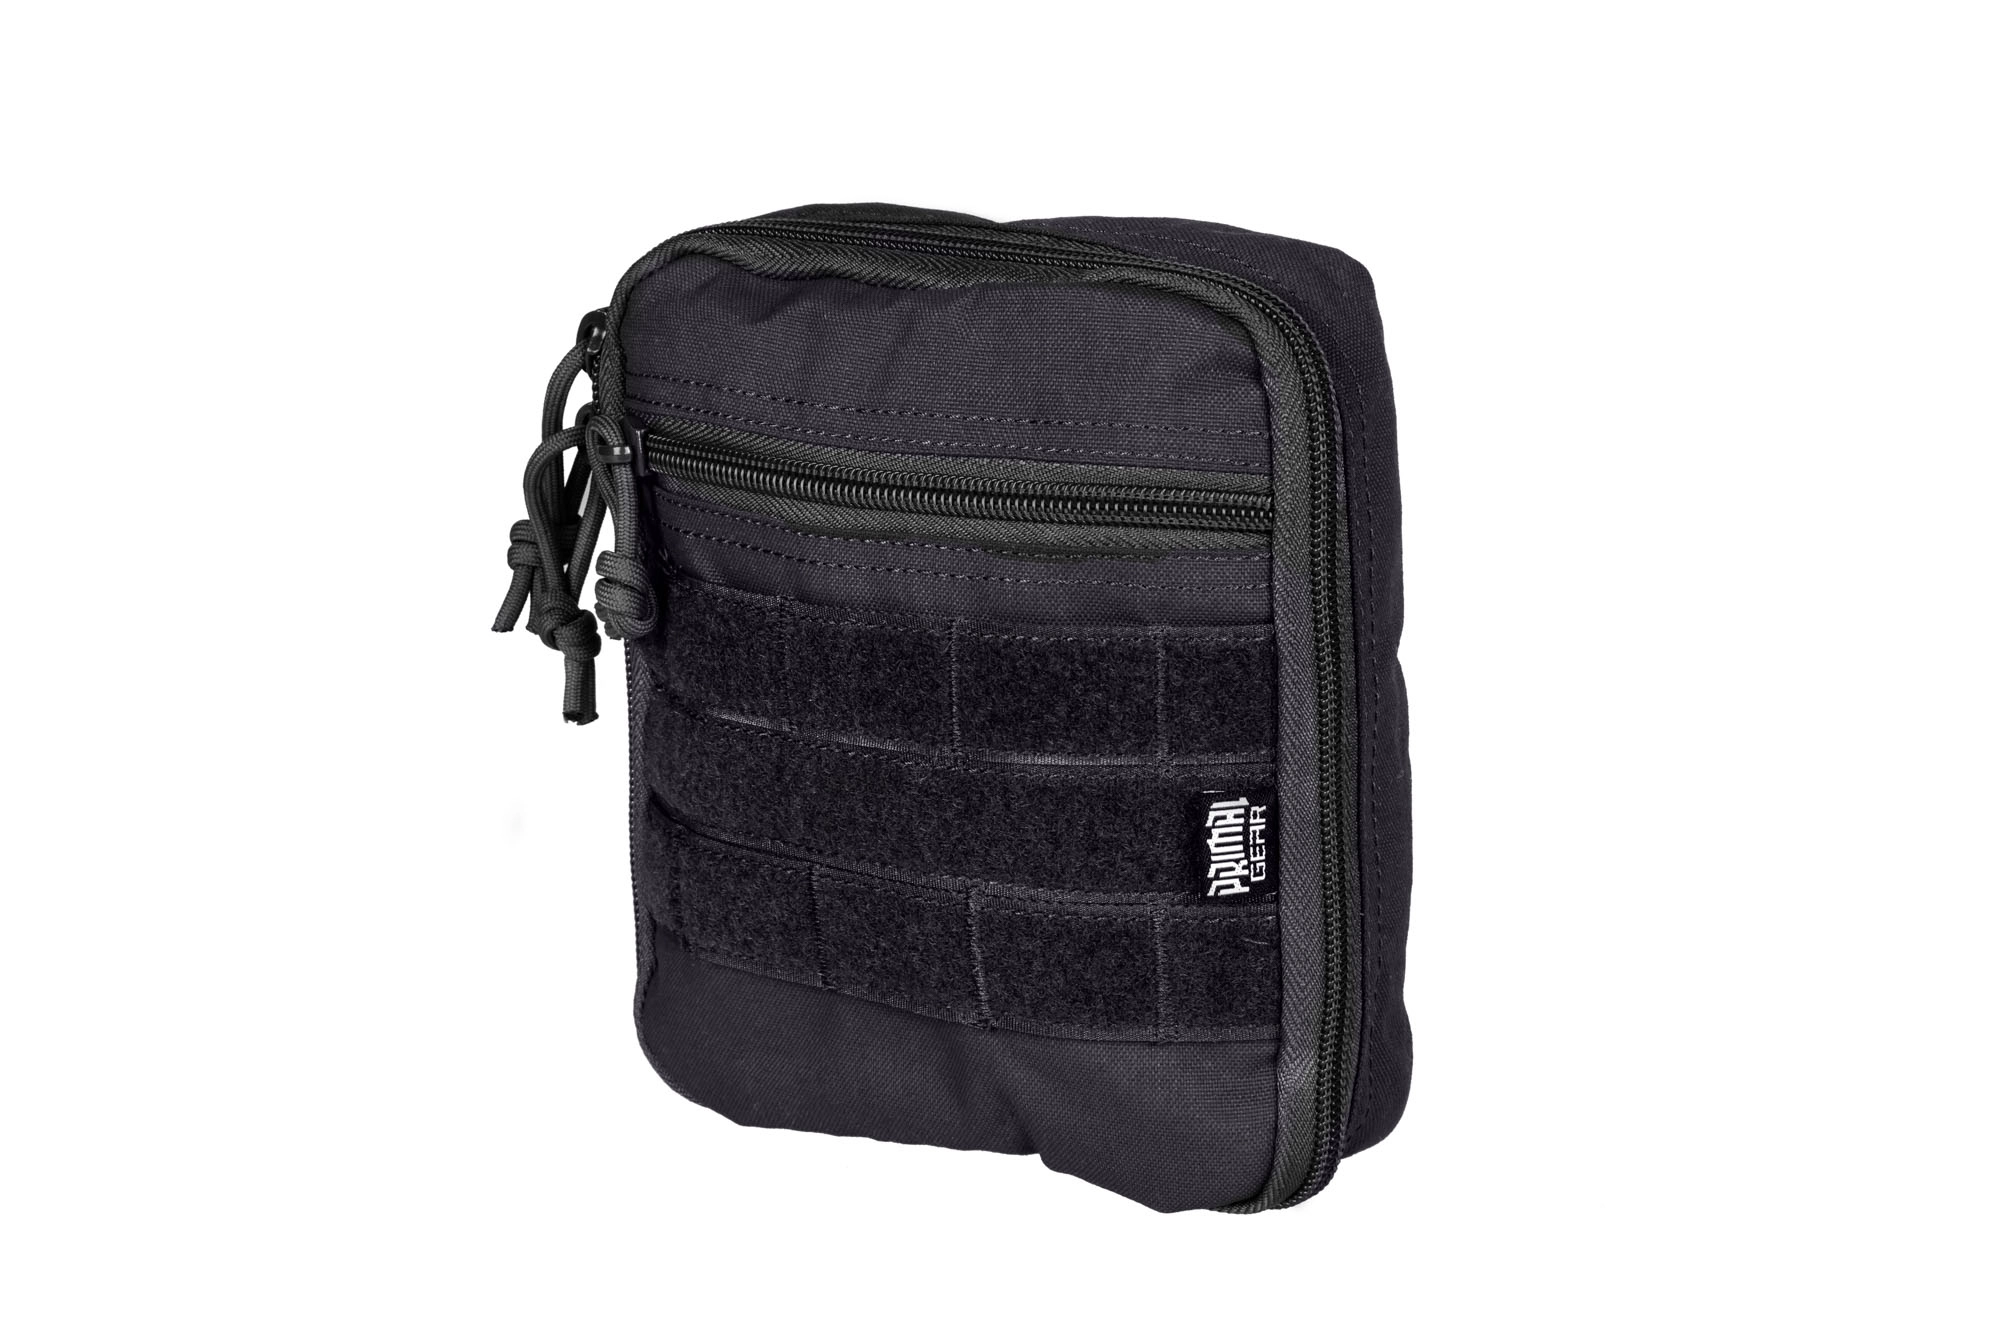 Porte-bagages universel Ofos All-Carry - Noir